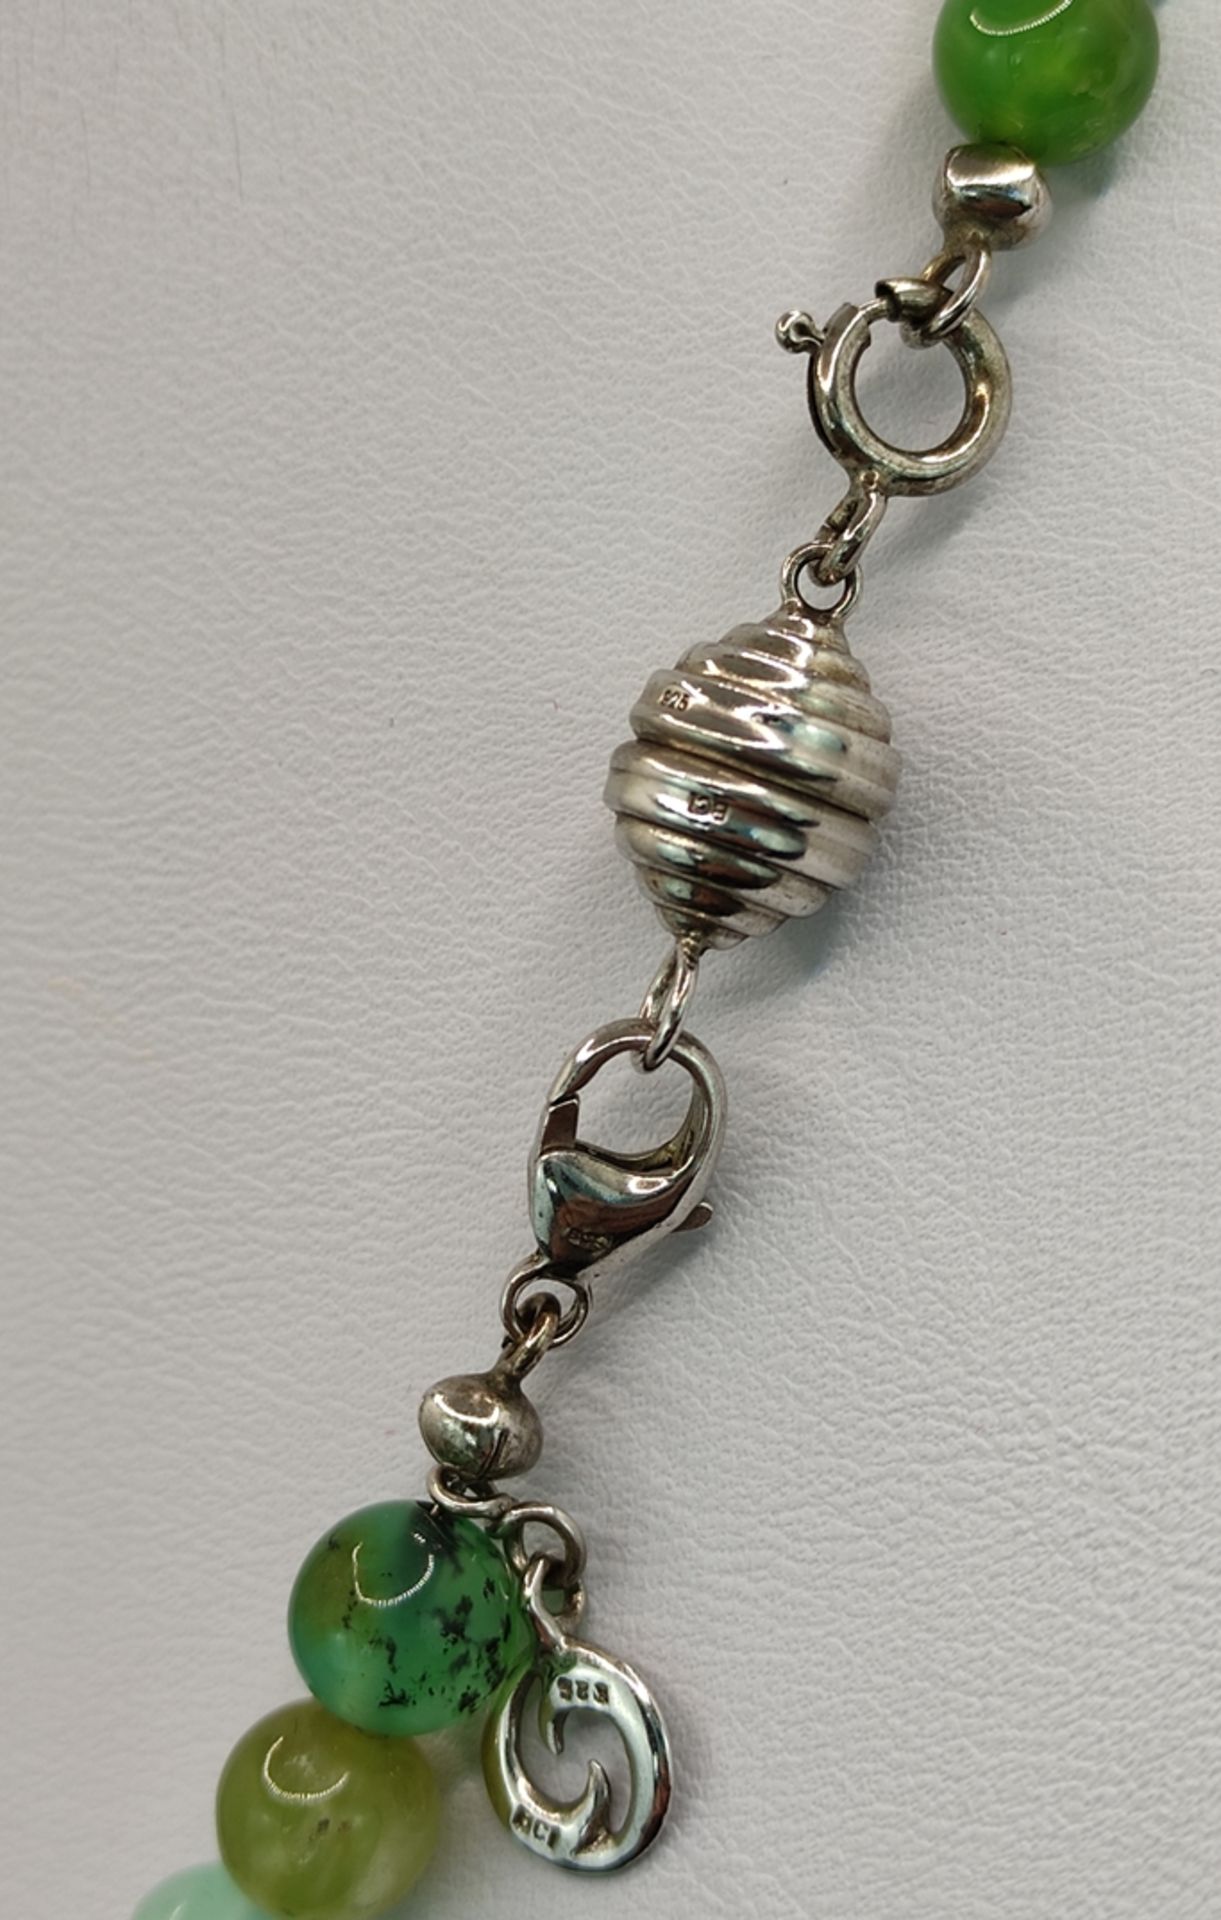 Chrysoprase necklace, beads with diameter of about 7,2mm, lobster clasp silver 935, inserted magnet - Image 3 of 3